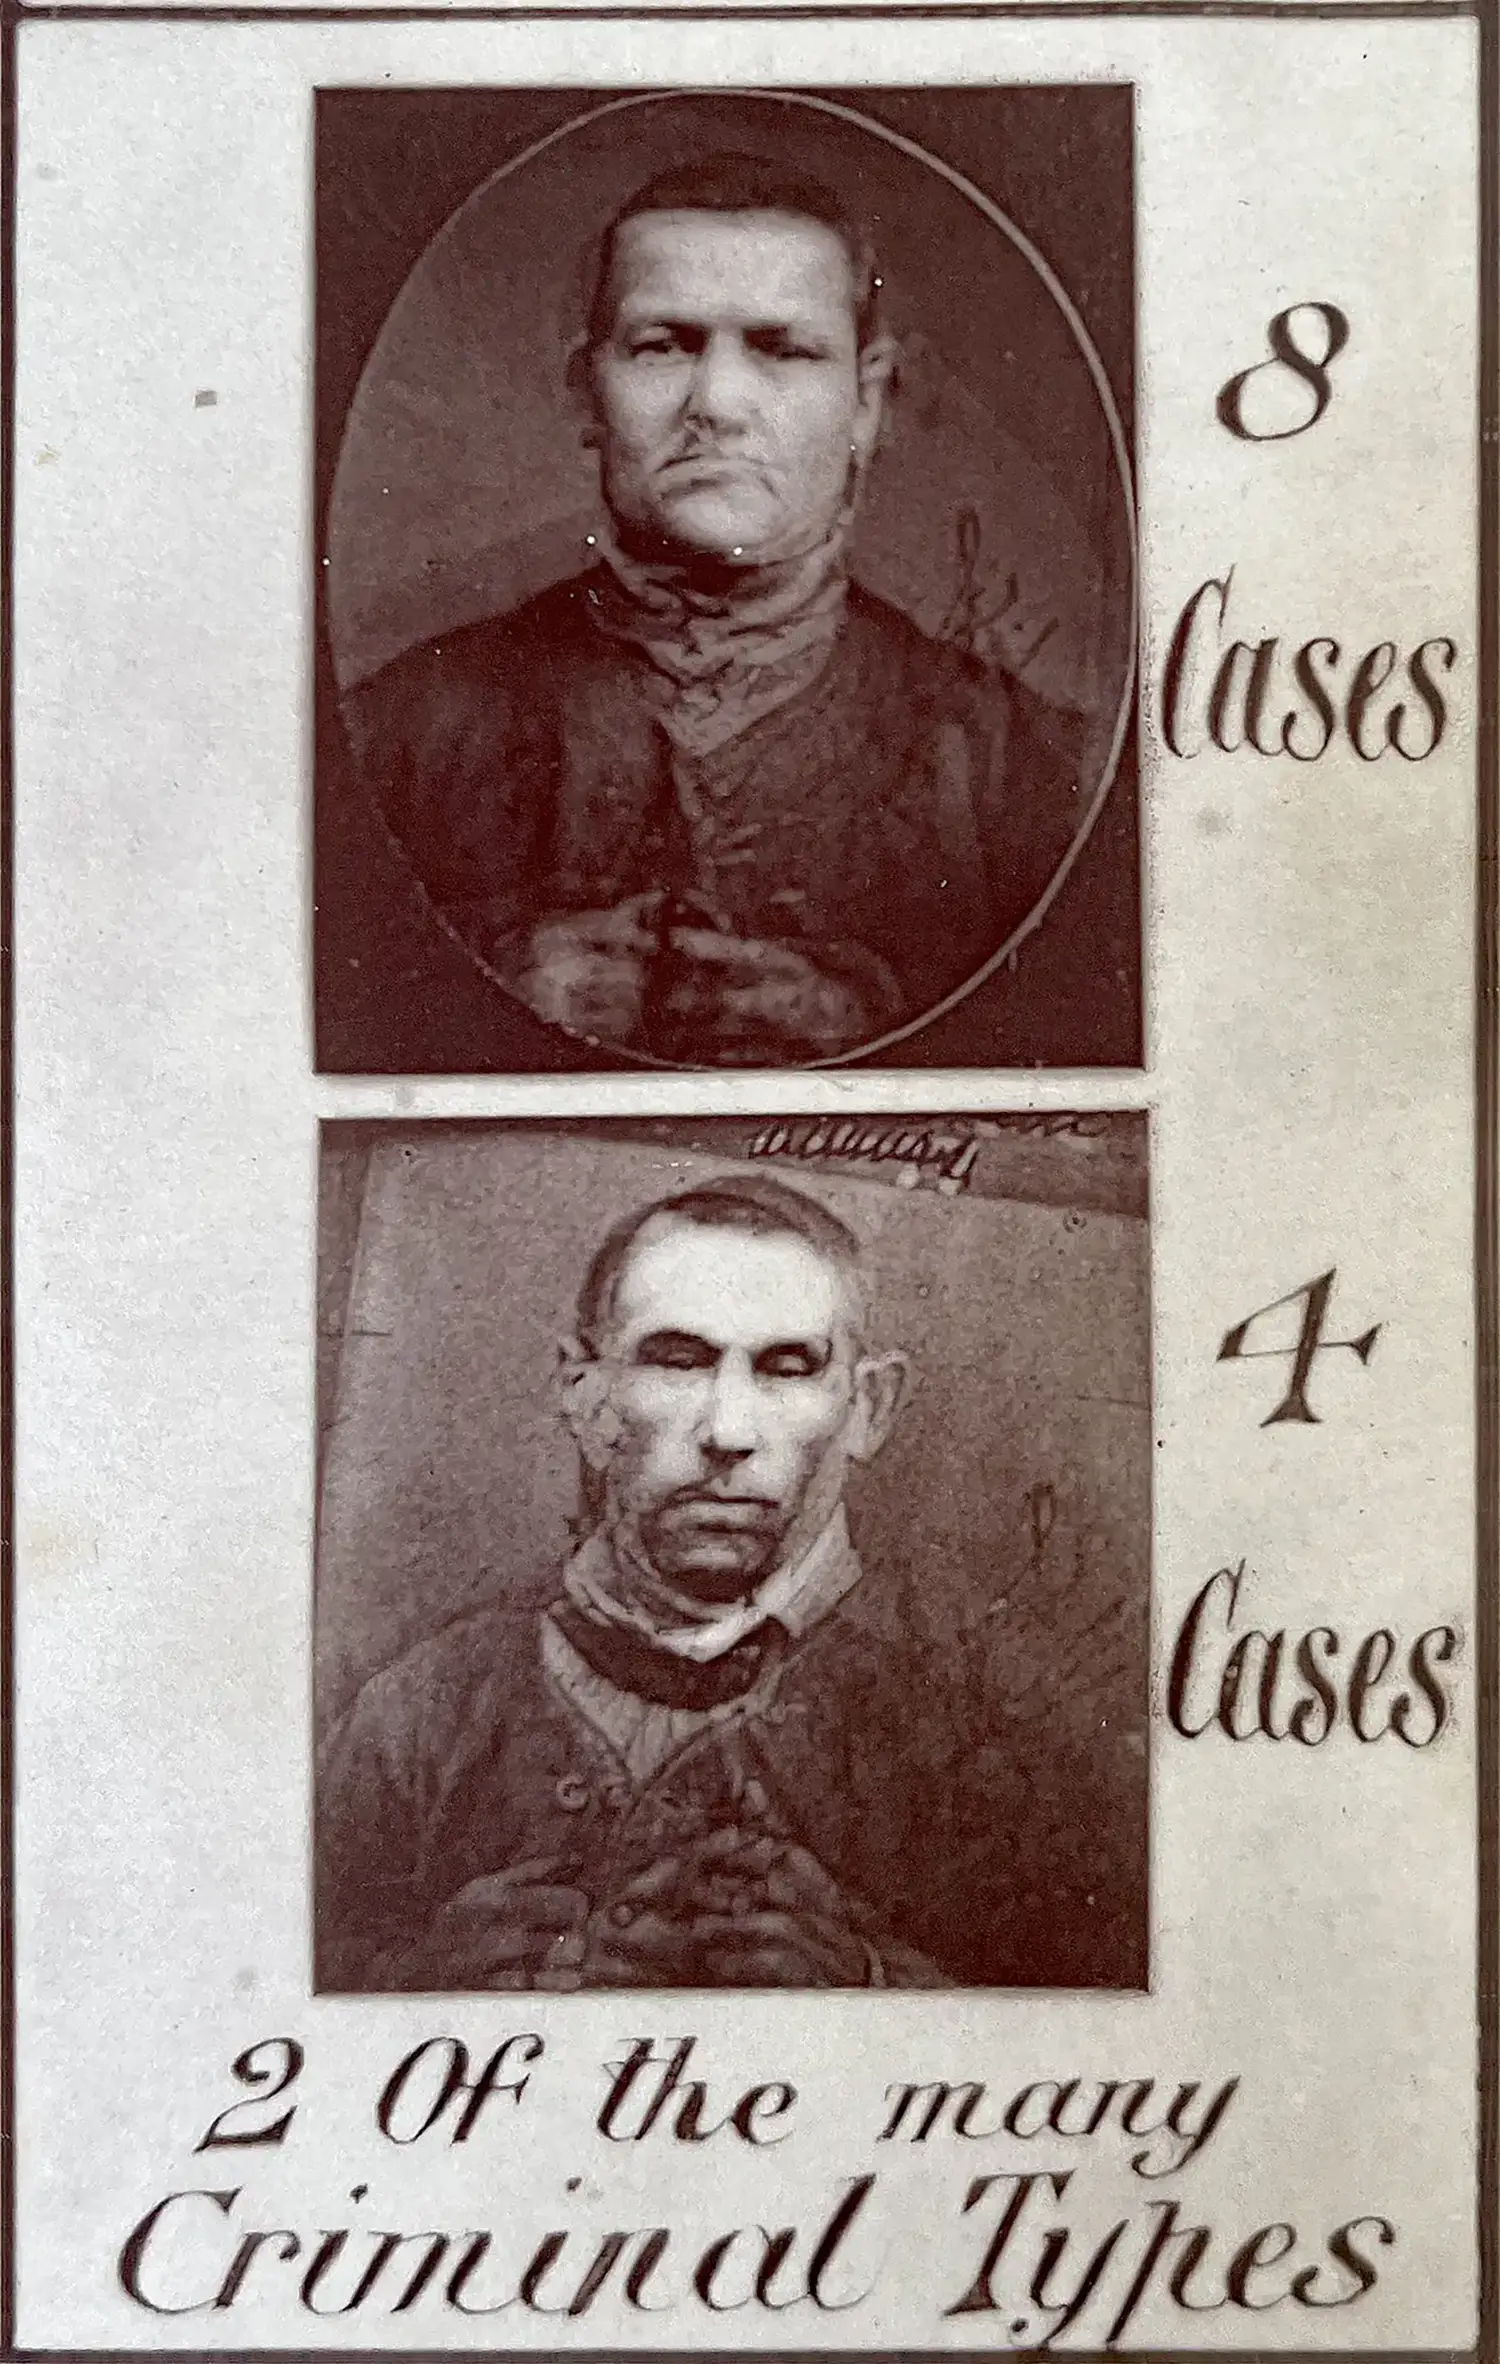 Composite portraits by Galton. There are two blurred portraits, one labeled “8 Cases” and the other “4 Cases.” The portraits show men with cropped hair, with the upper torso blurry, suggesting multiple overlapping photos. The image is subtitled “2 Of the many Criminal Types.”